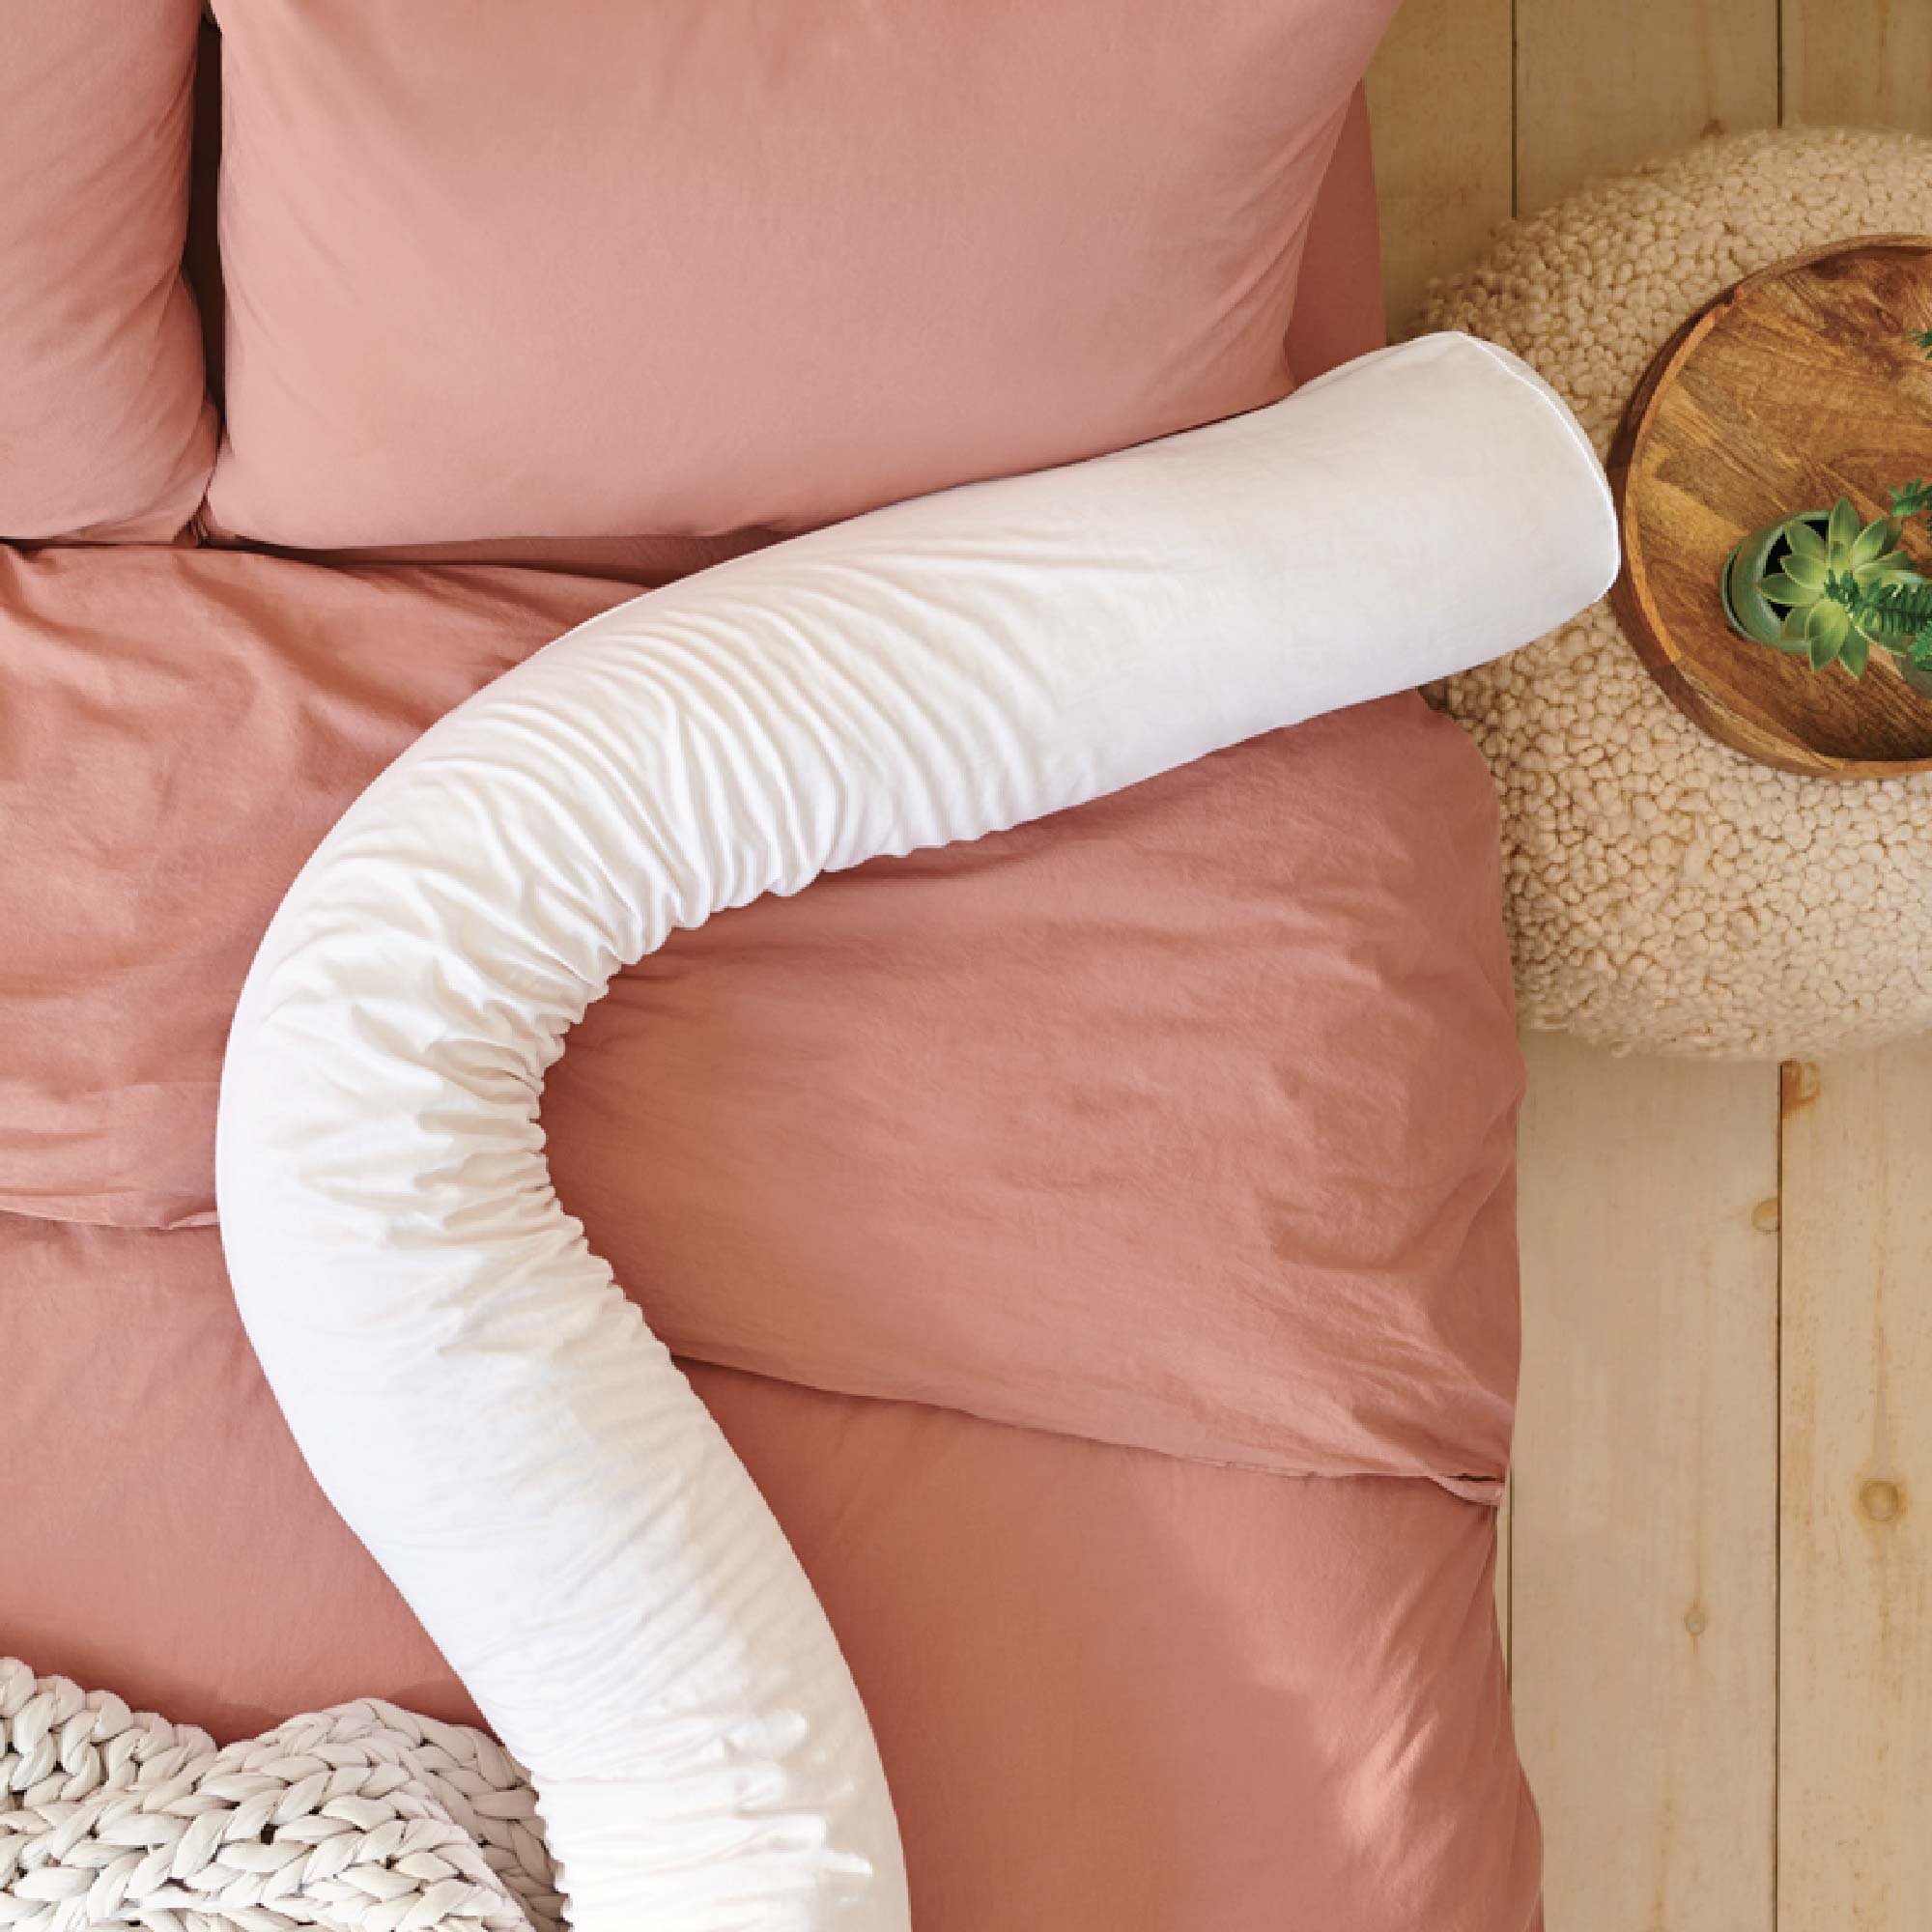 How to Wash a Body Pillow: The Step-By-Step Guide